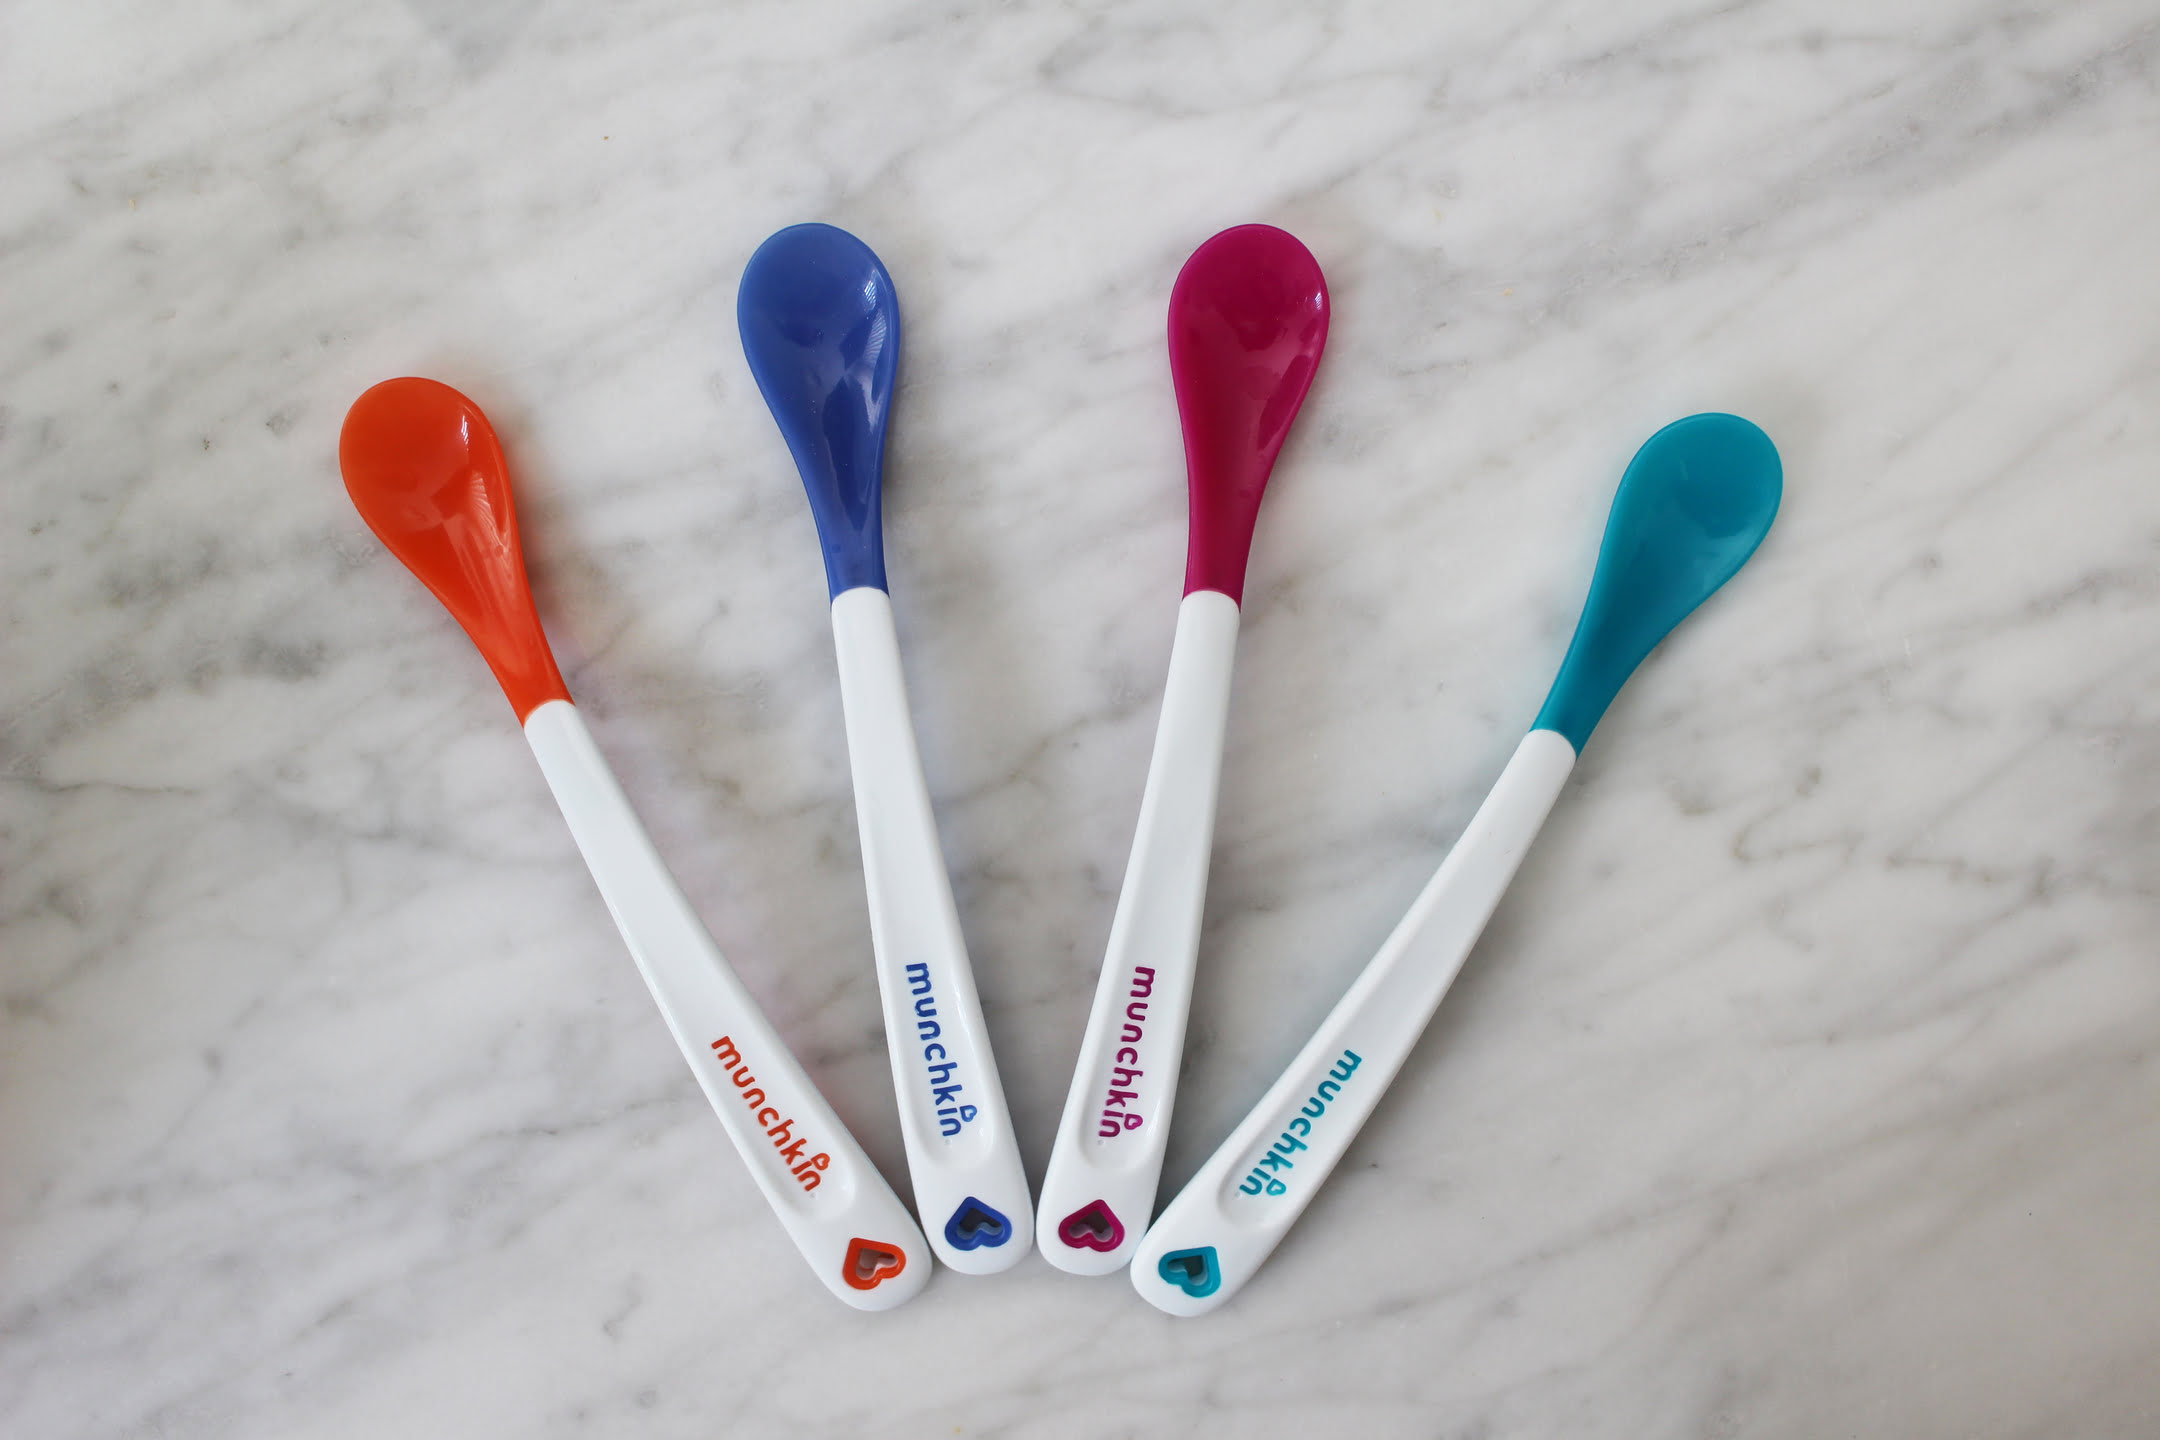 Review: Soft-Tip Feeding Spoons – A Must-Have for Mess-Free Mealtimes